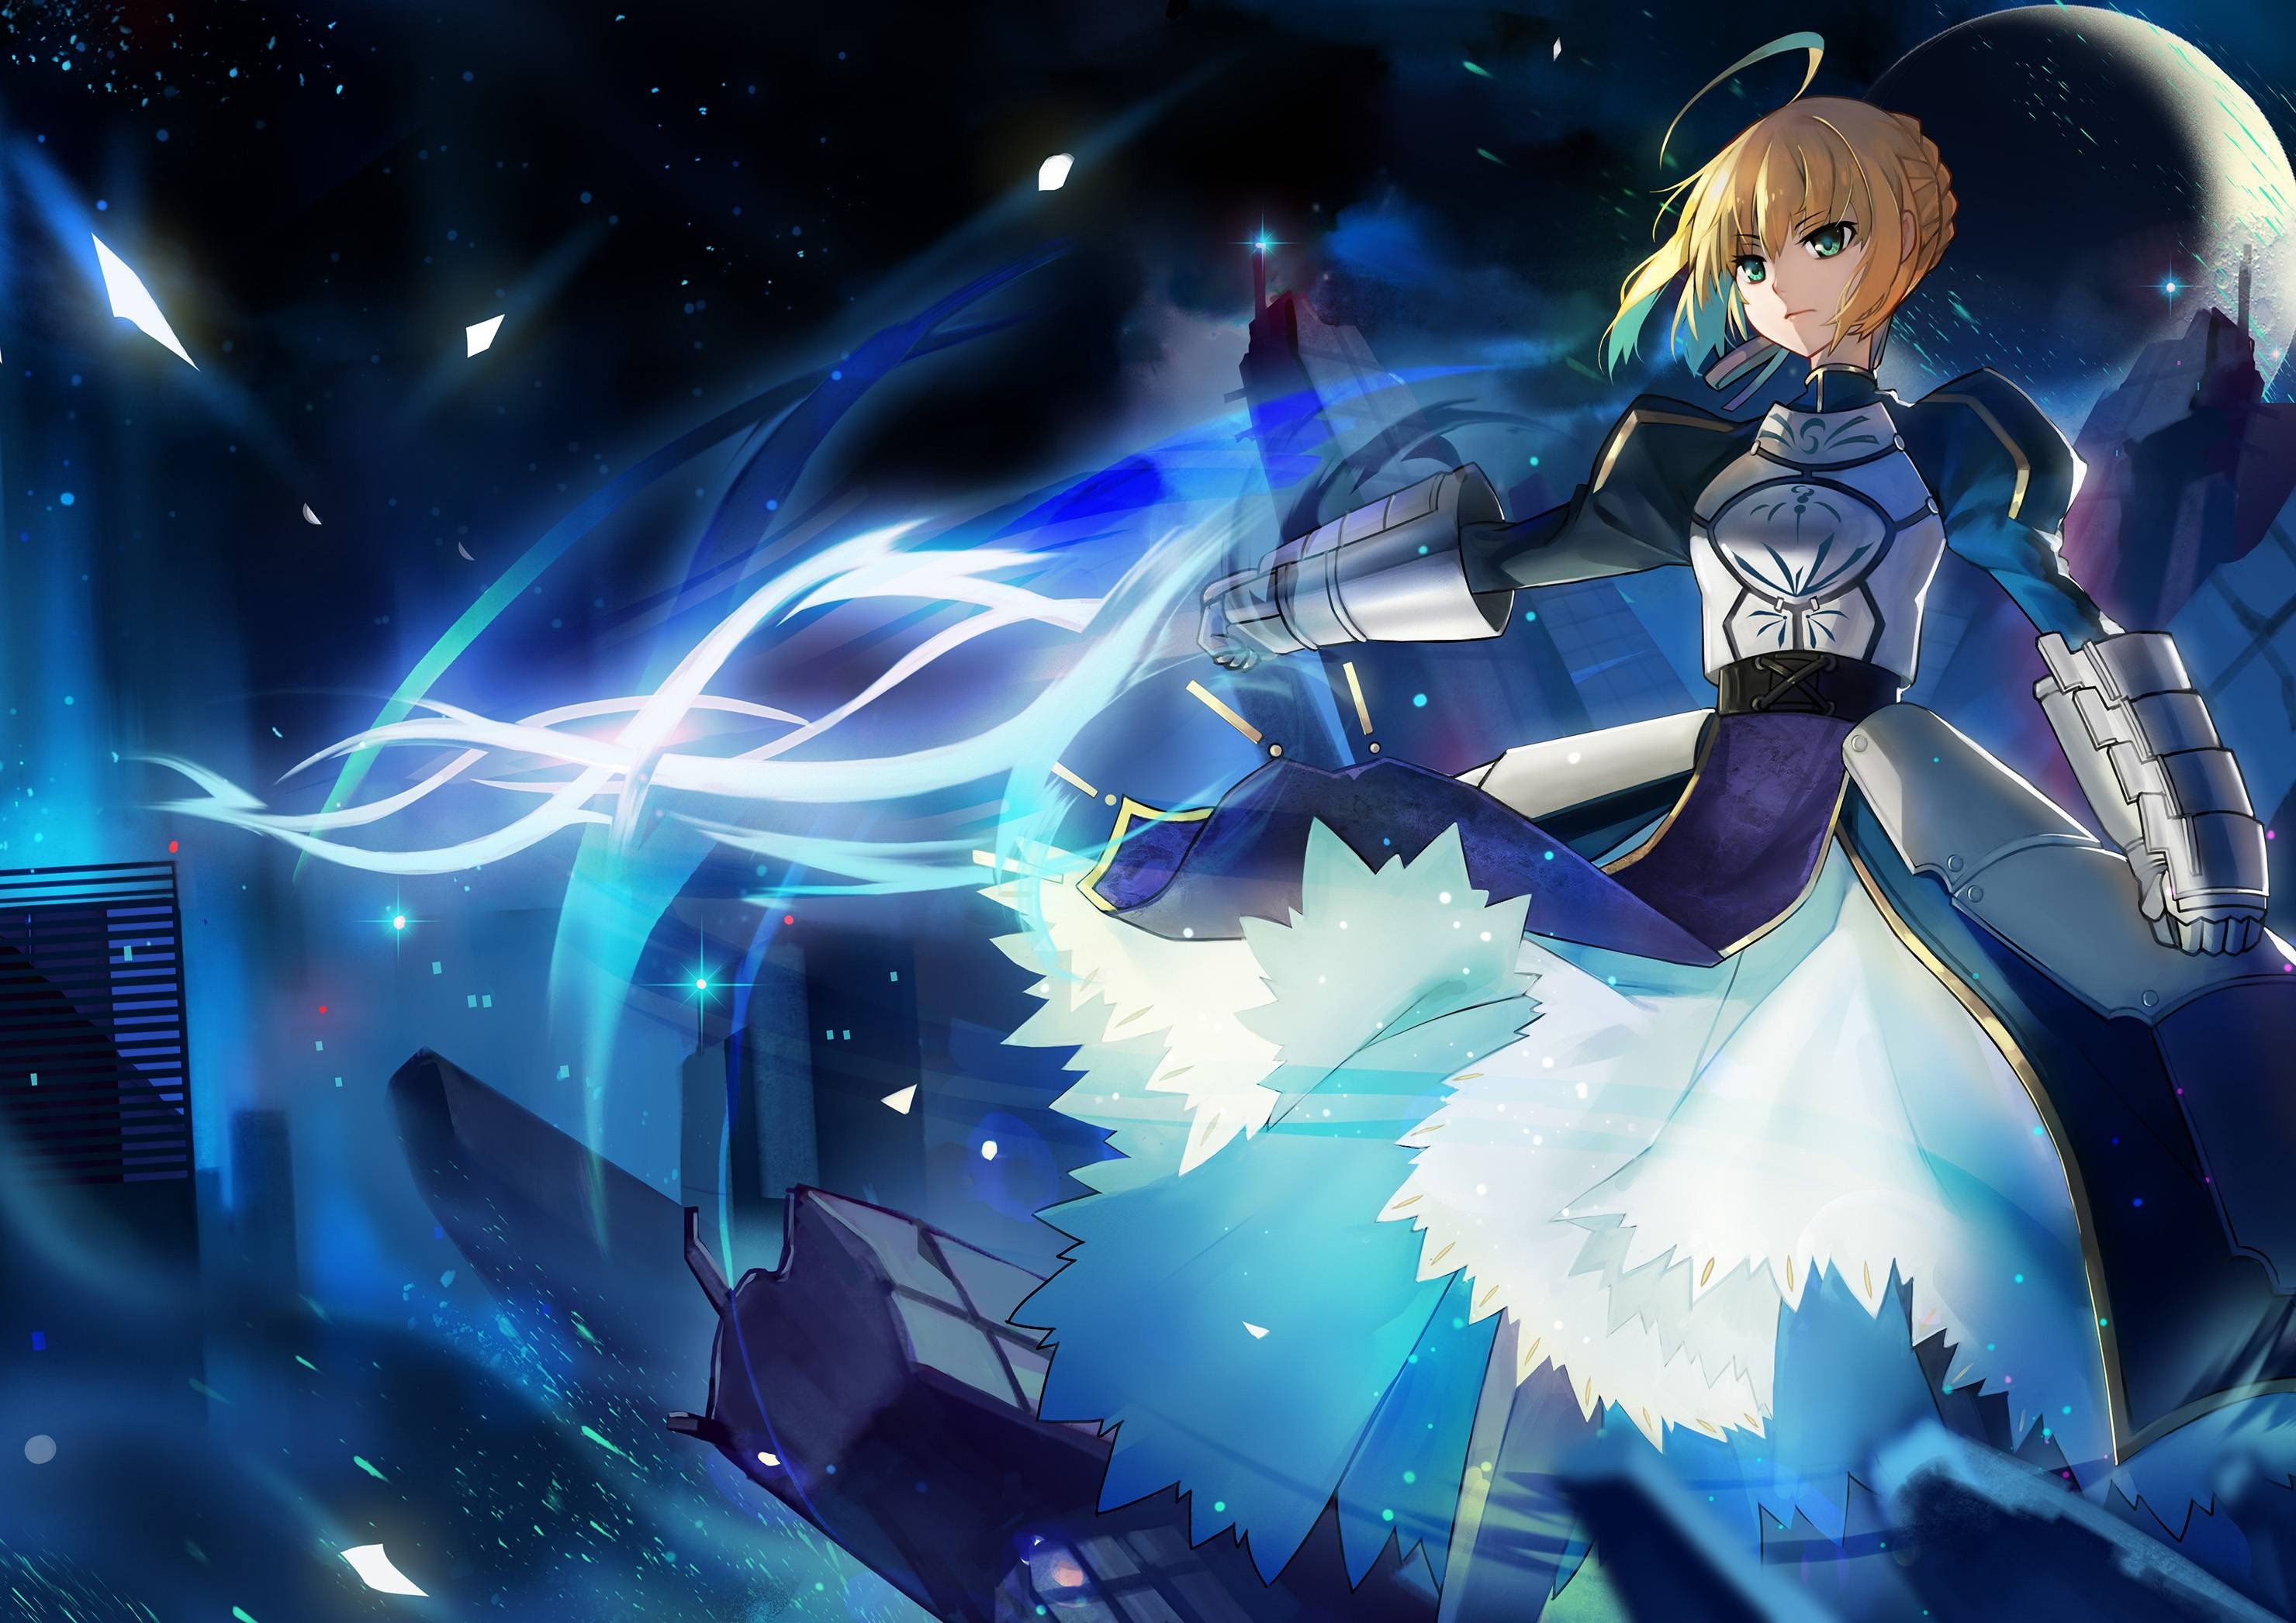 9. "Saber" from Fate/stay night - wide 7